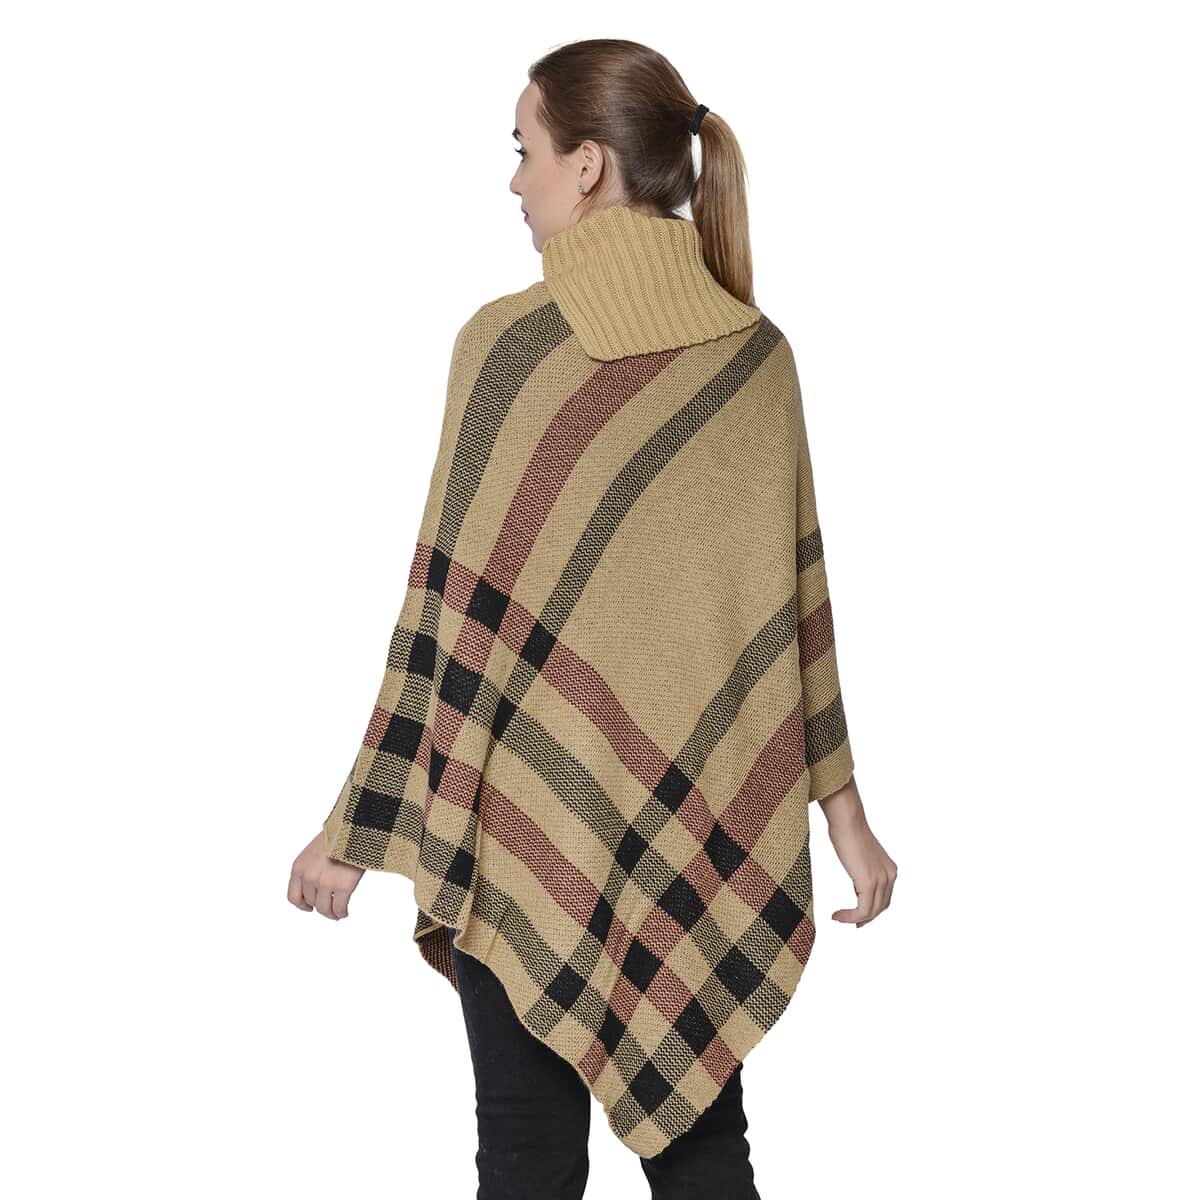 Tan Plaid Pattern Split Cowl Neck Poncho (One Size Fits Most, 100% Acrylic) image number 1